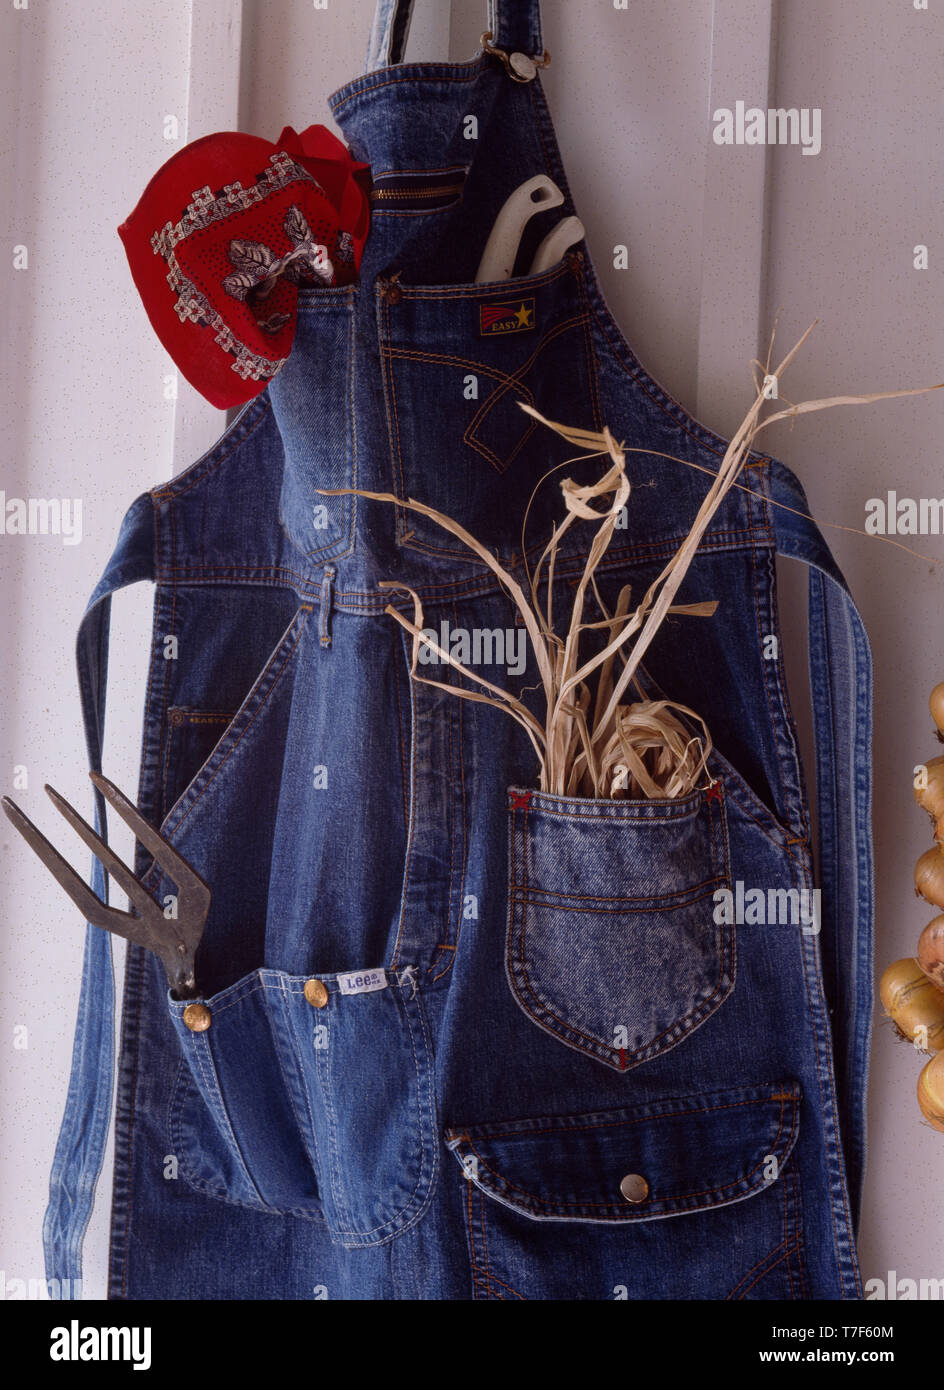 Gardening apron made from recycled denim jeans Stock Photo - Alamy